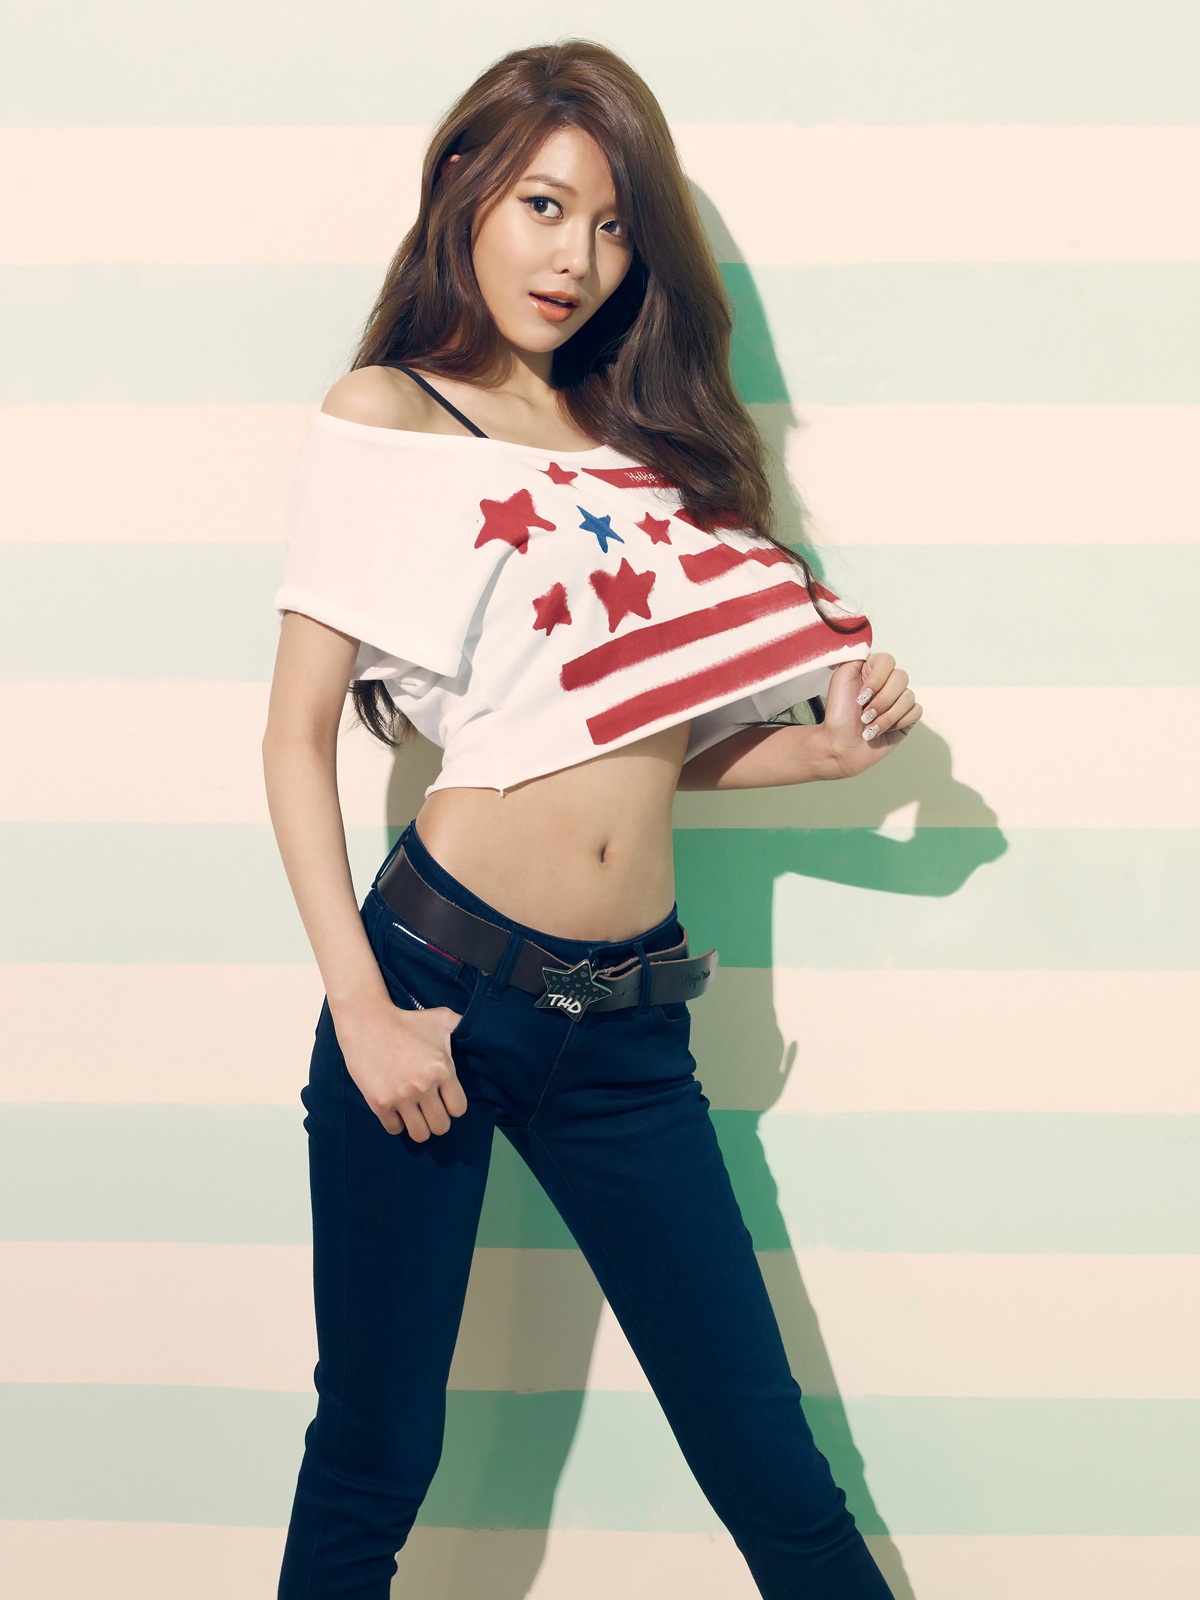 SNSD+Sooyoung+CeCi+March+2013.jpg